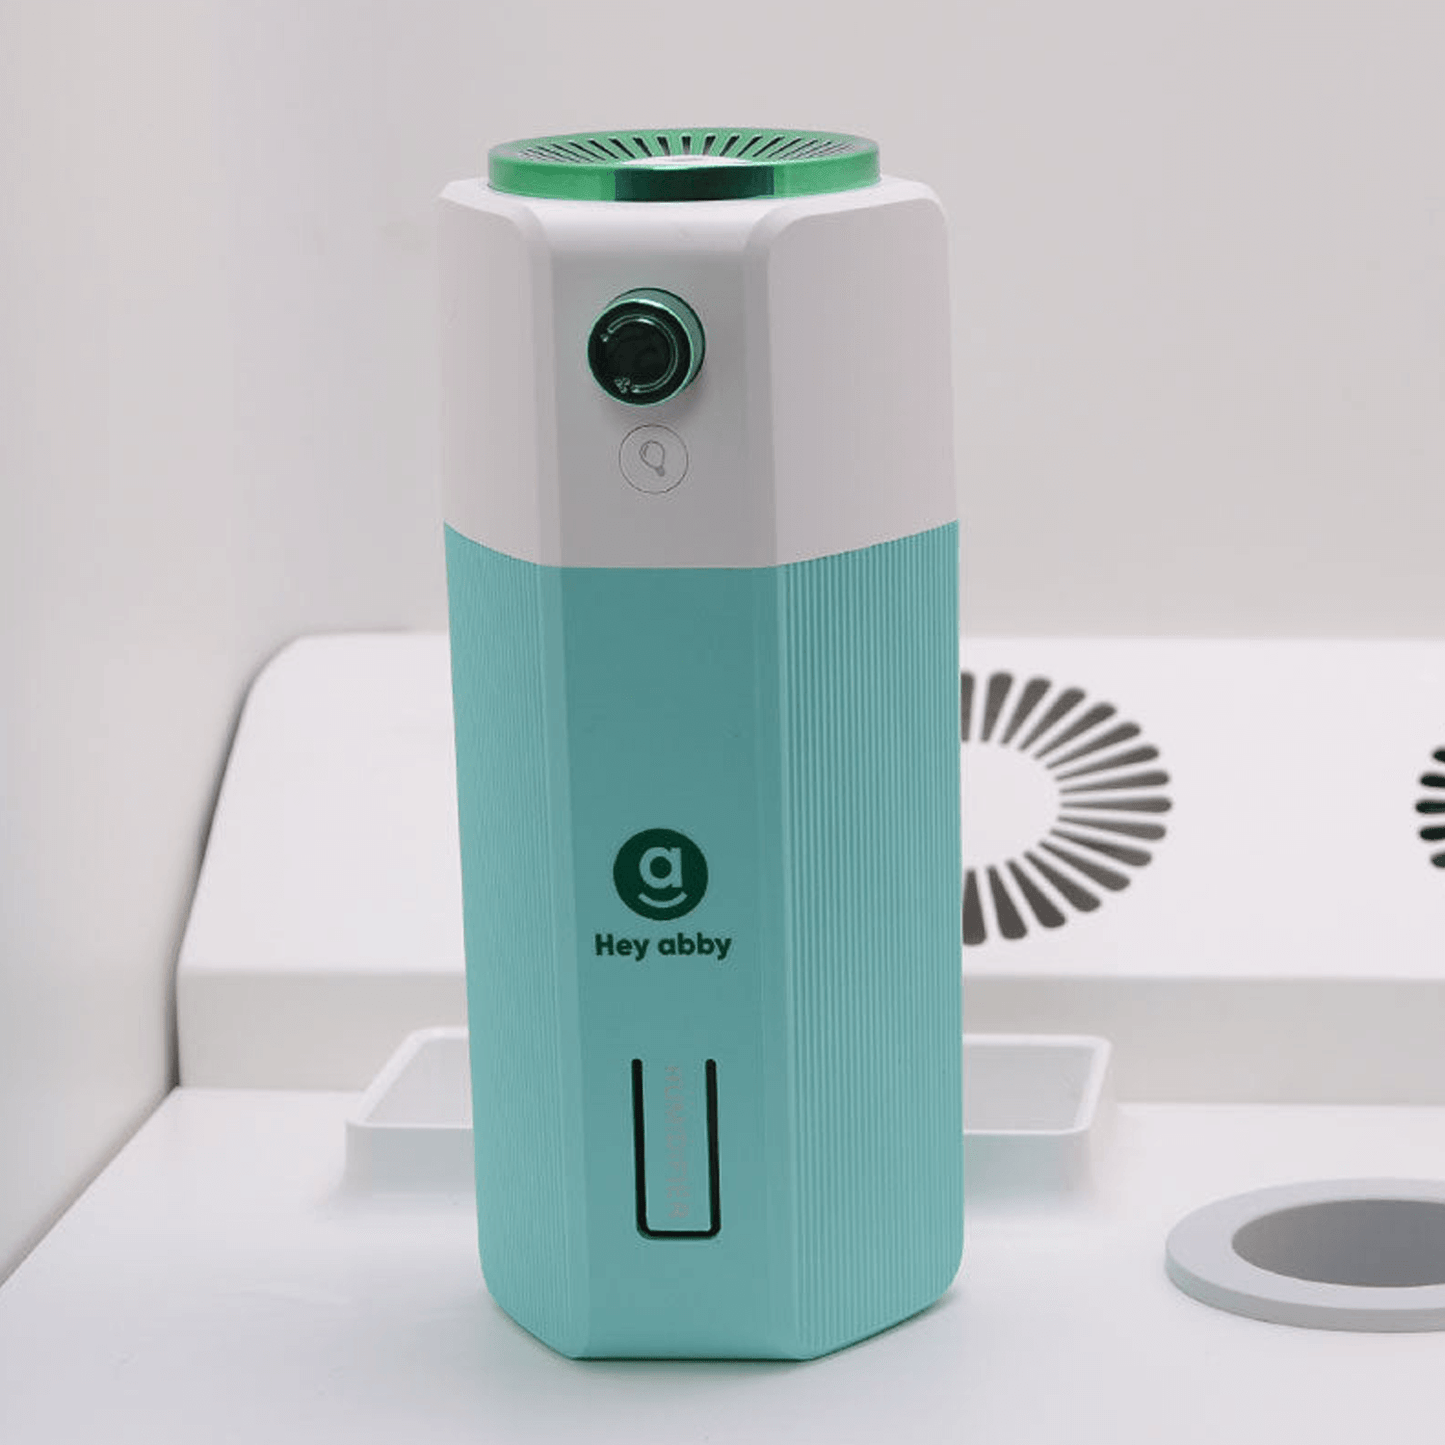 Hey abby Smart Mini USB Humidifier with App Control | Hey abby smart mini USB humidifier | Grow Tents Depot | Climate Control | 734896542305